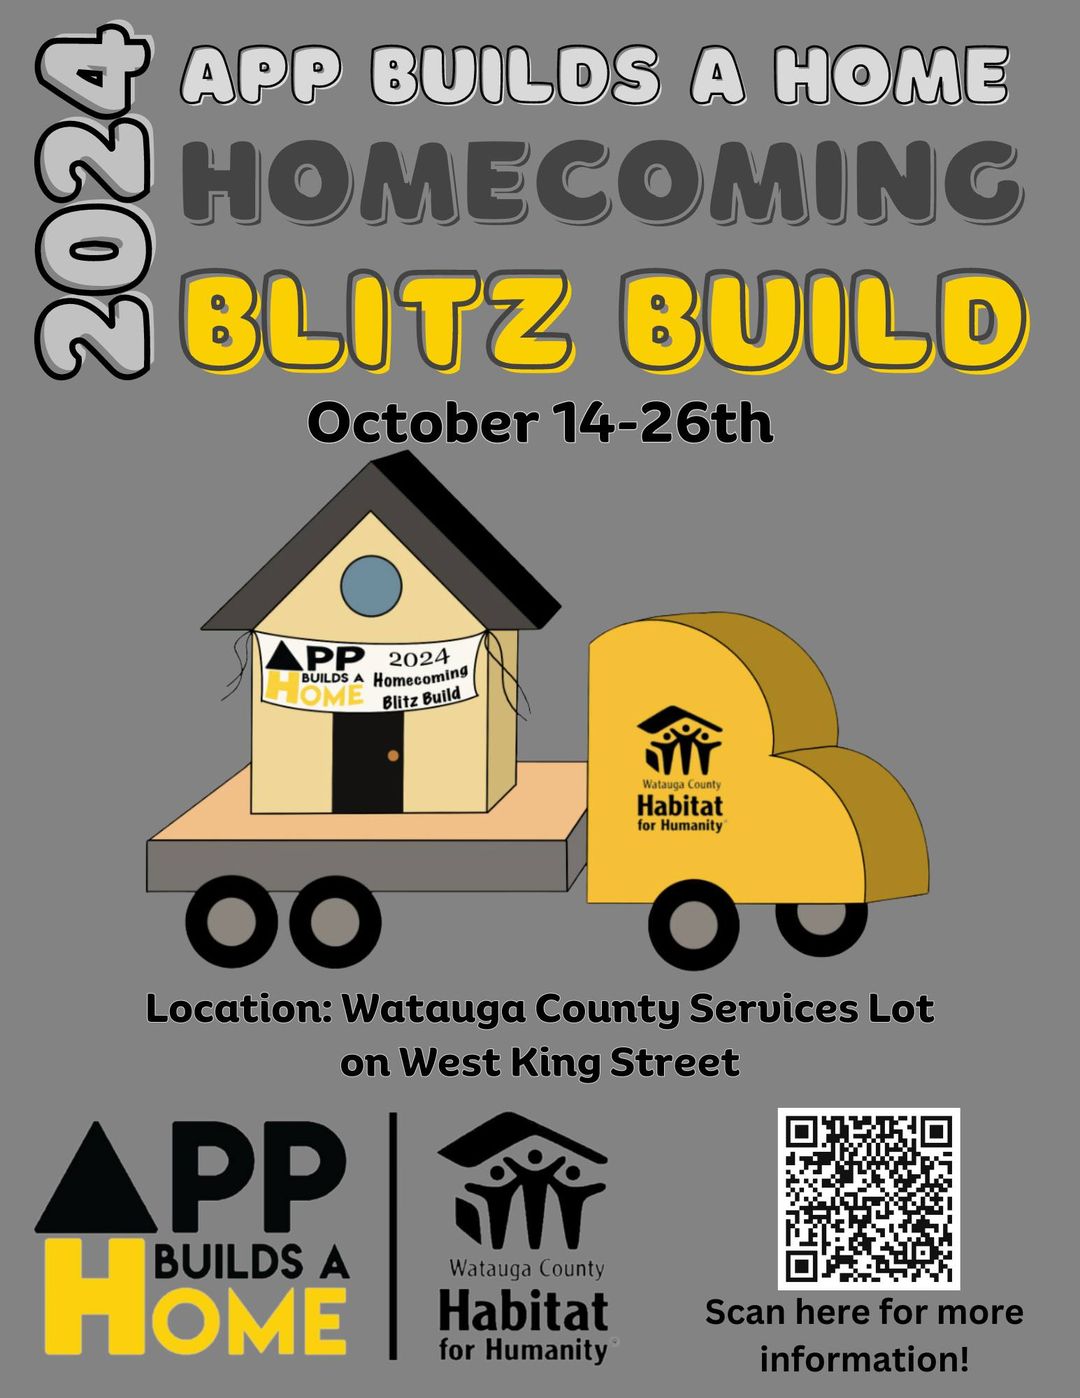 Homecoming Blitz flyer text reads App Builds a Home Homecoming Blitz Build October 14-26th Location: Watauga County Services Lot on West King Street